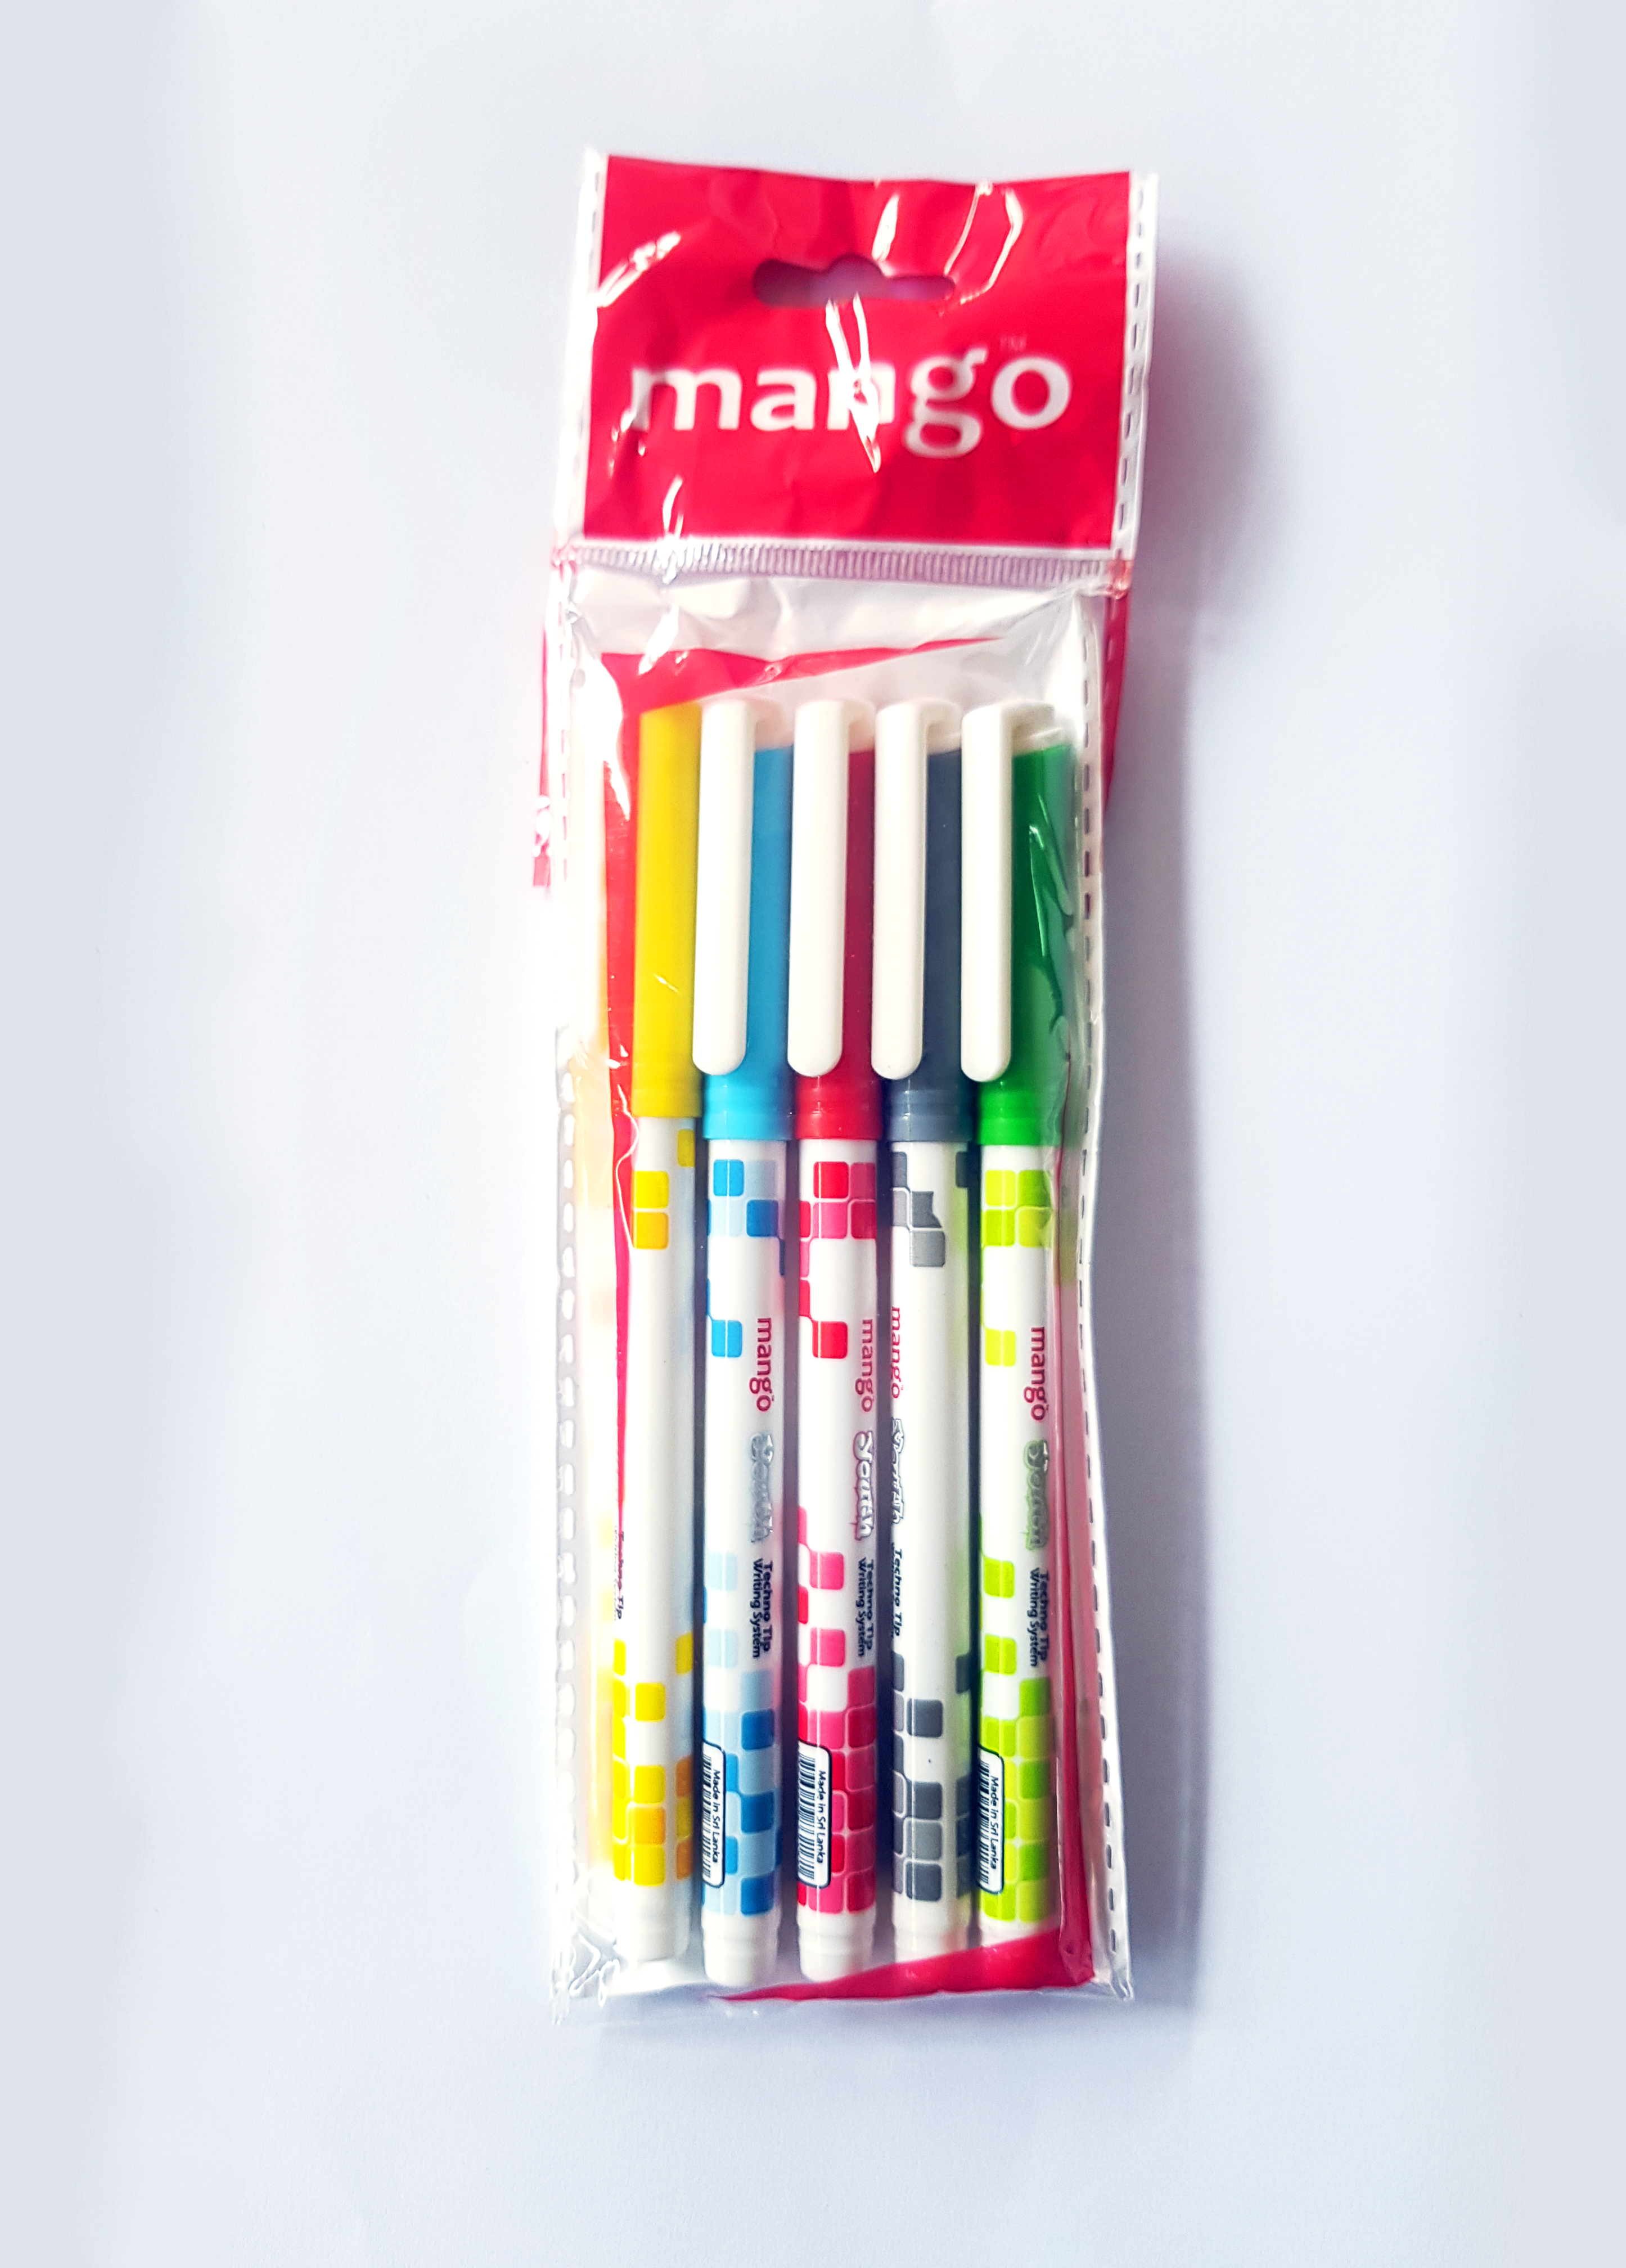 Mango Youth 5 pens pouch 